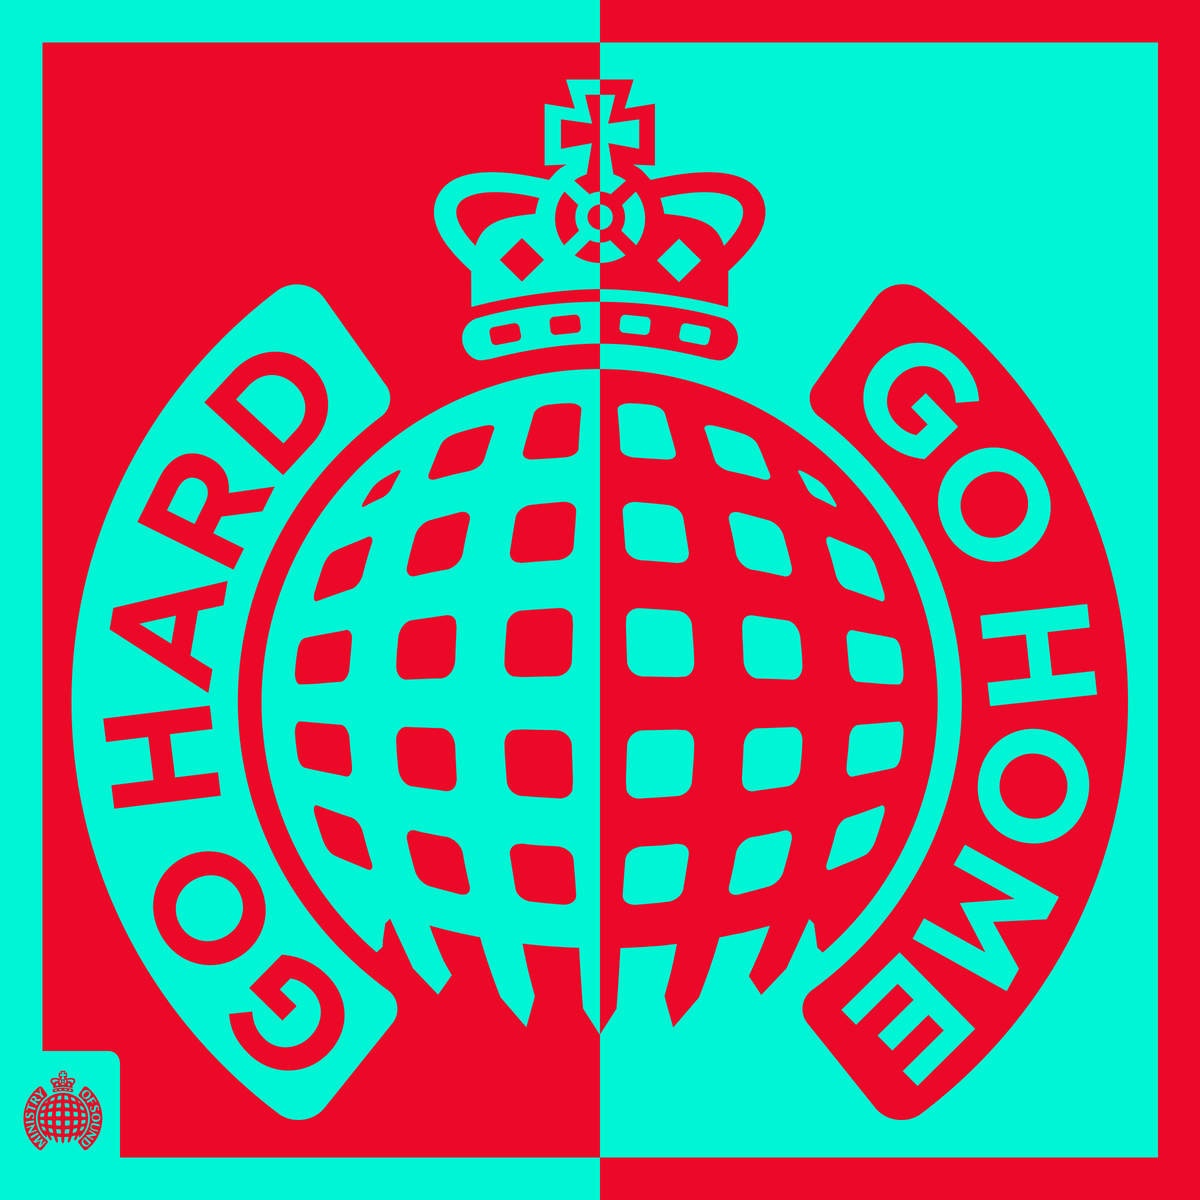 Go Hard or Go Home - Ministry of Sound